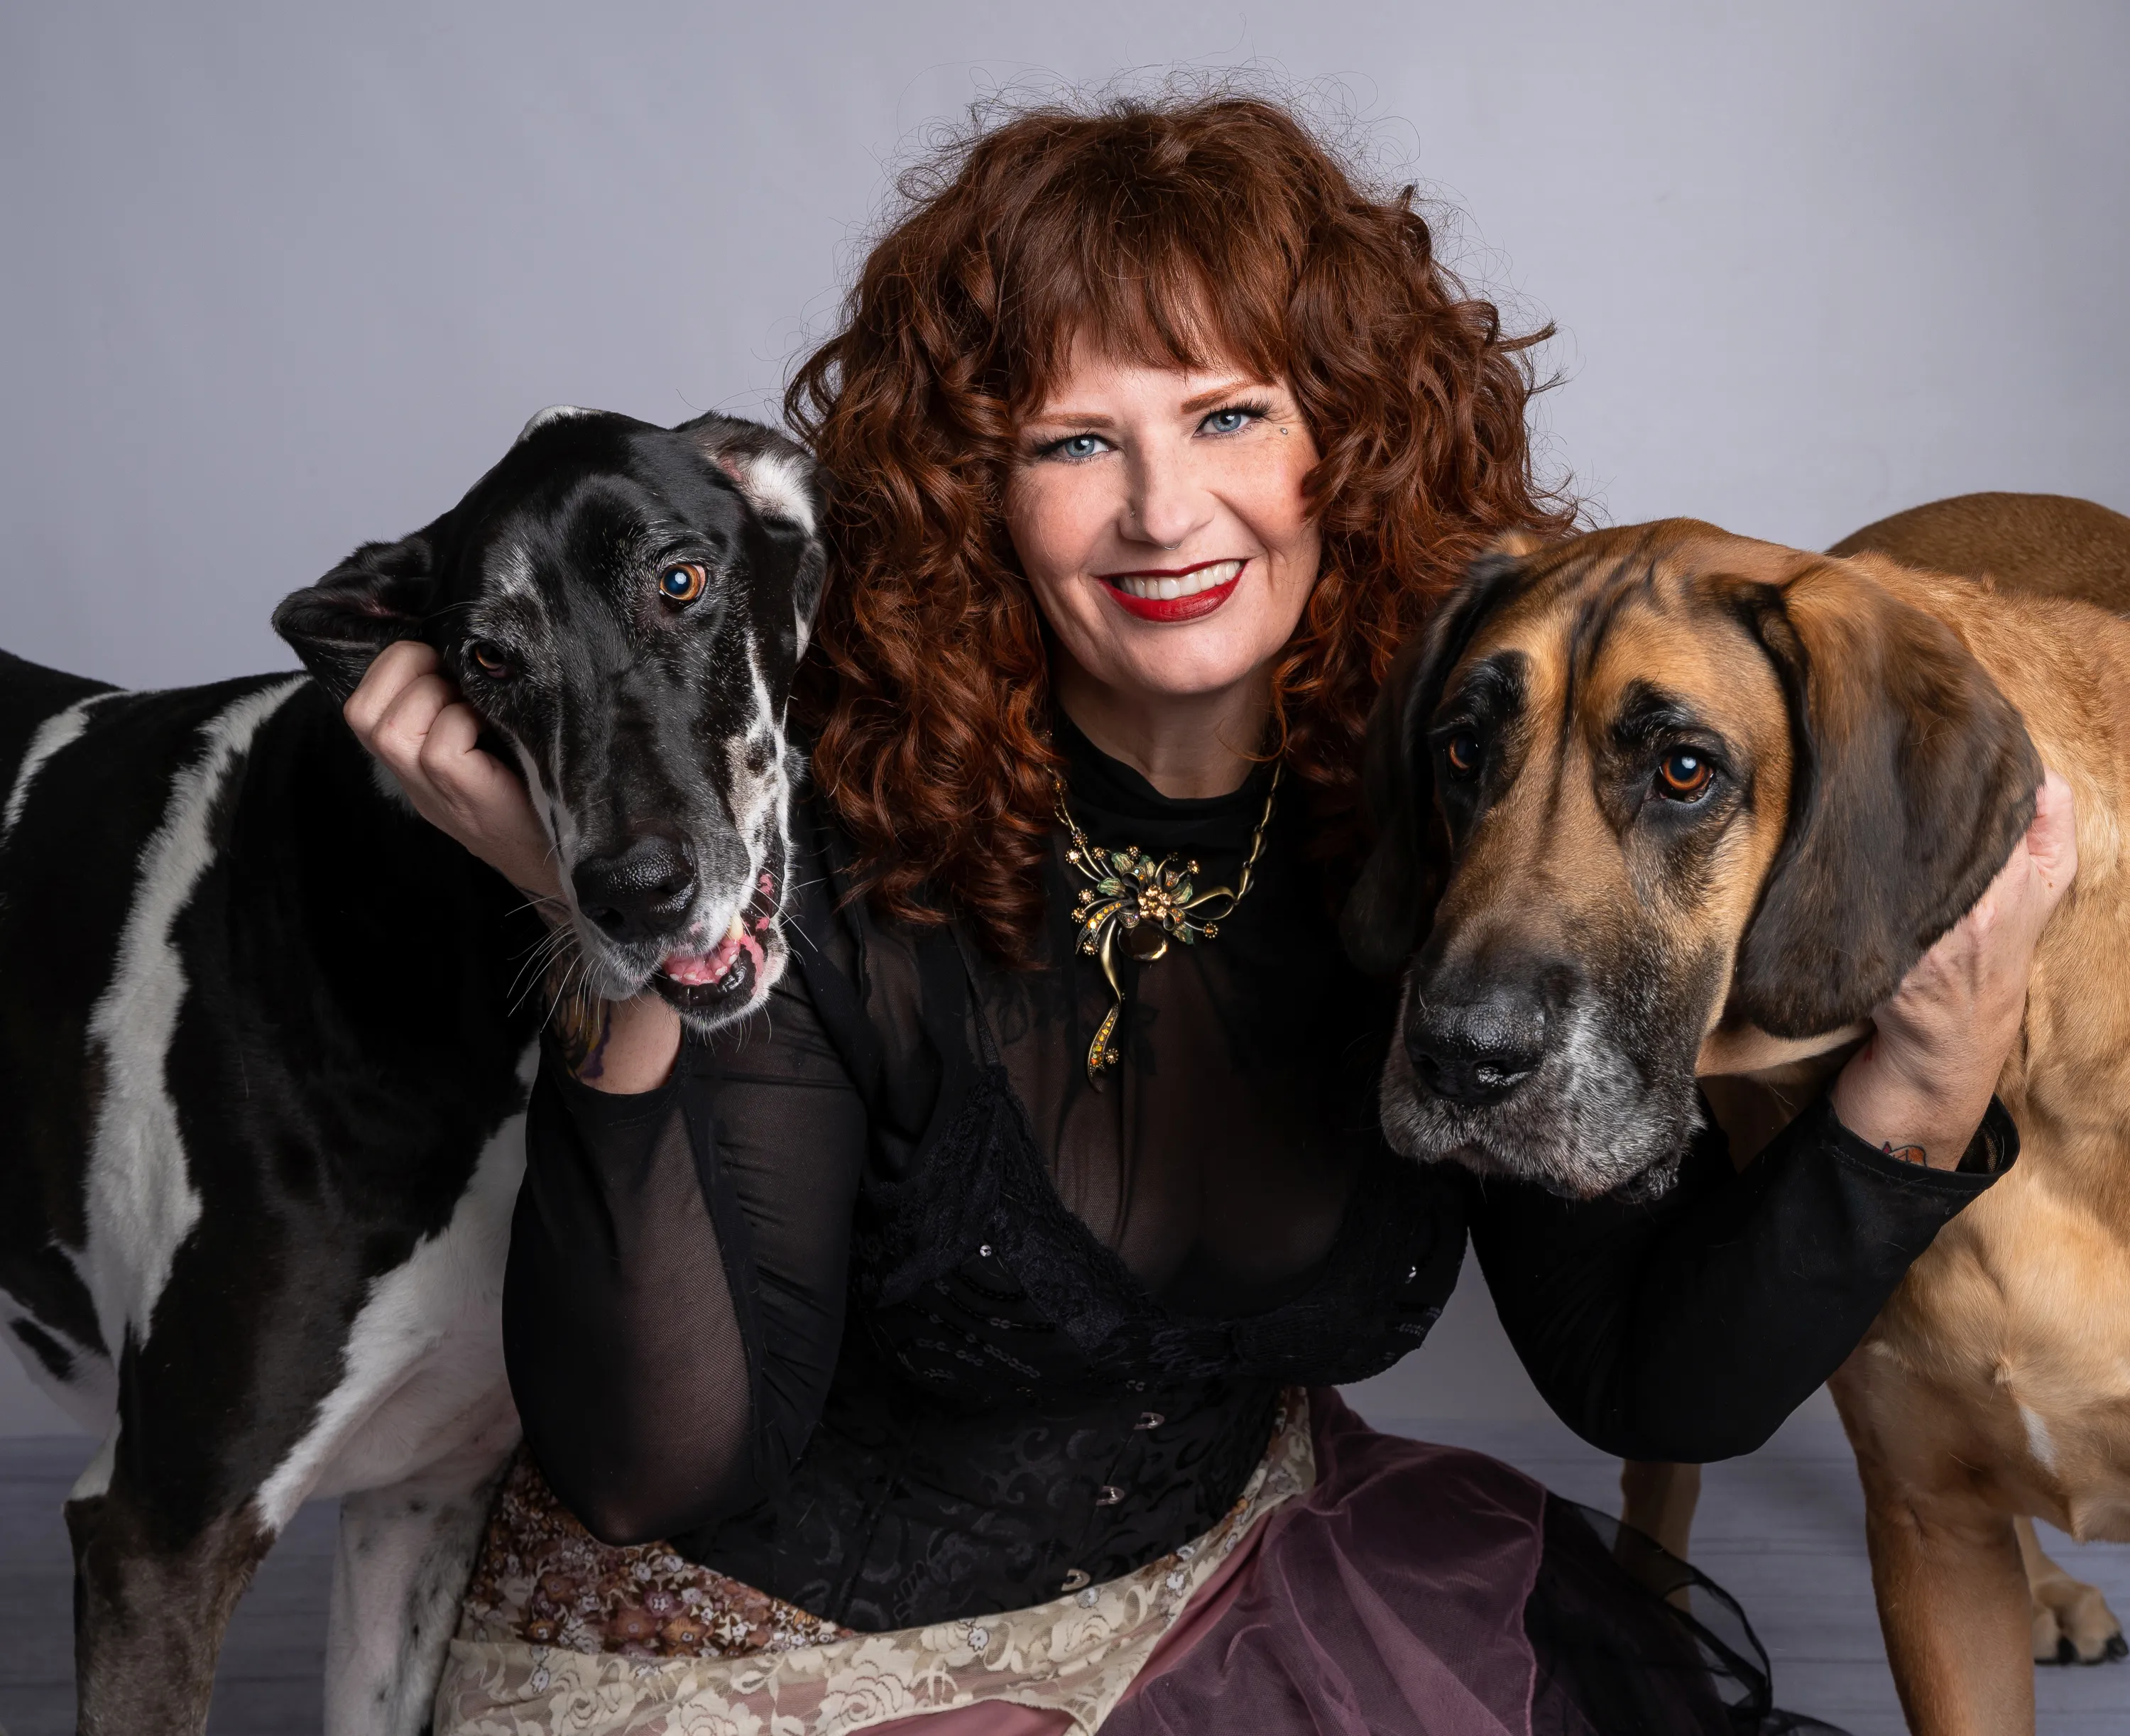 redhaired woman with two large dogs